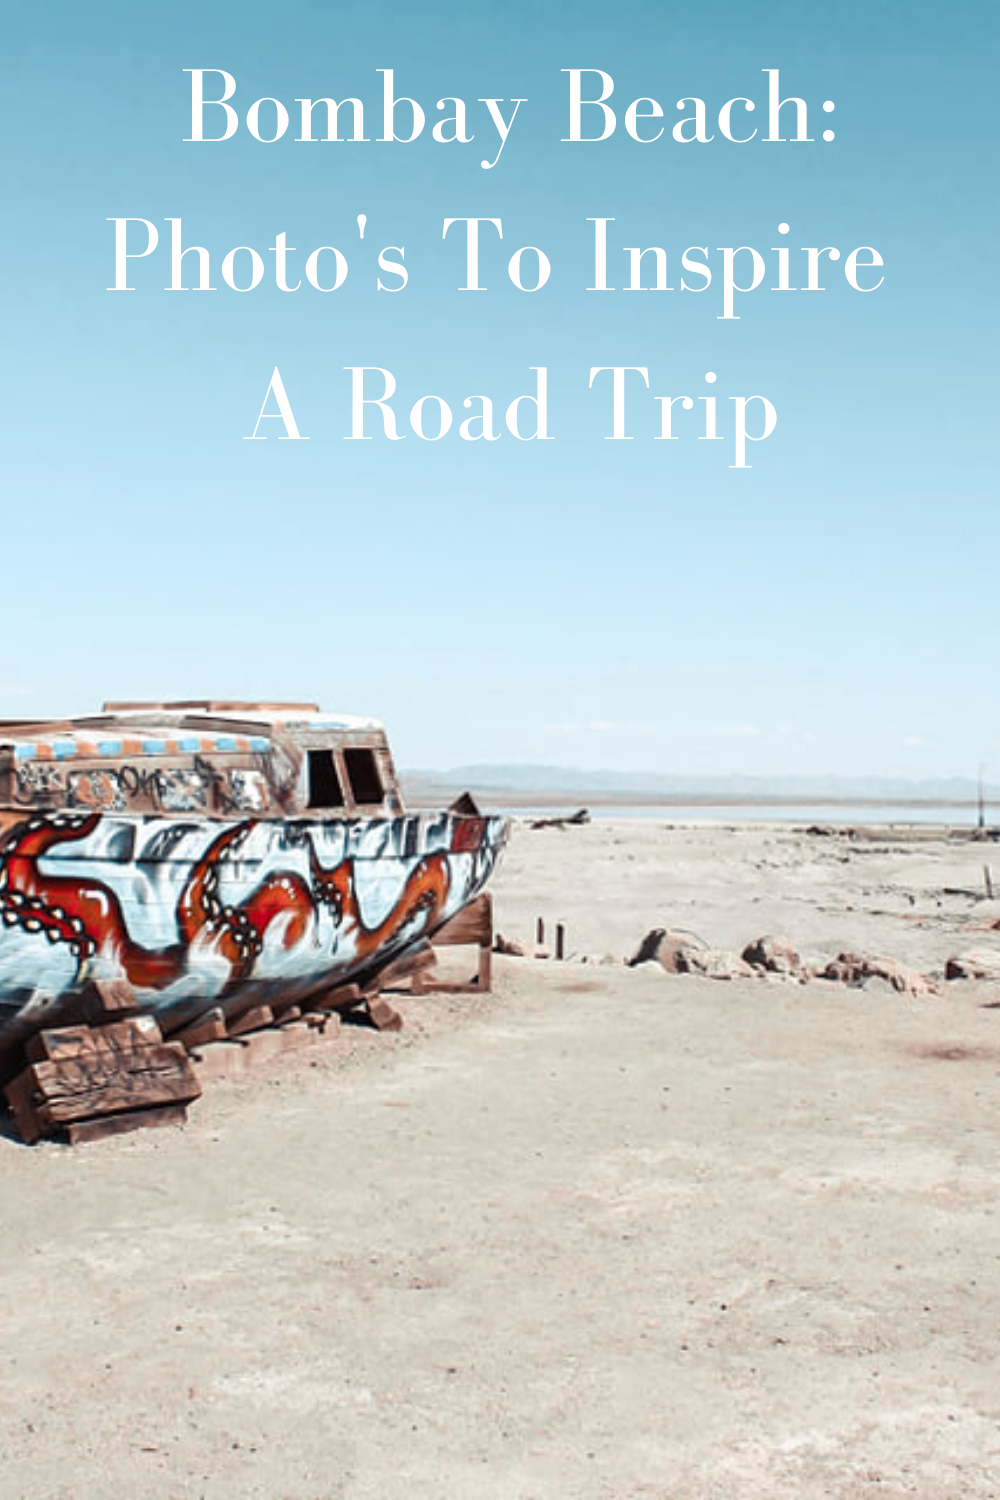 Bombay Beach: Photo's to Inspire A Road Trip